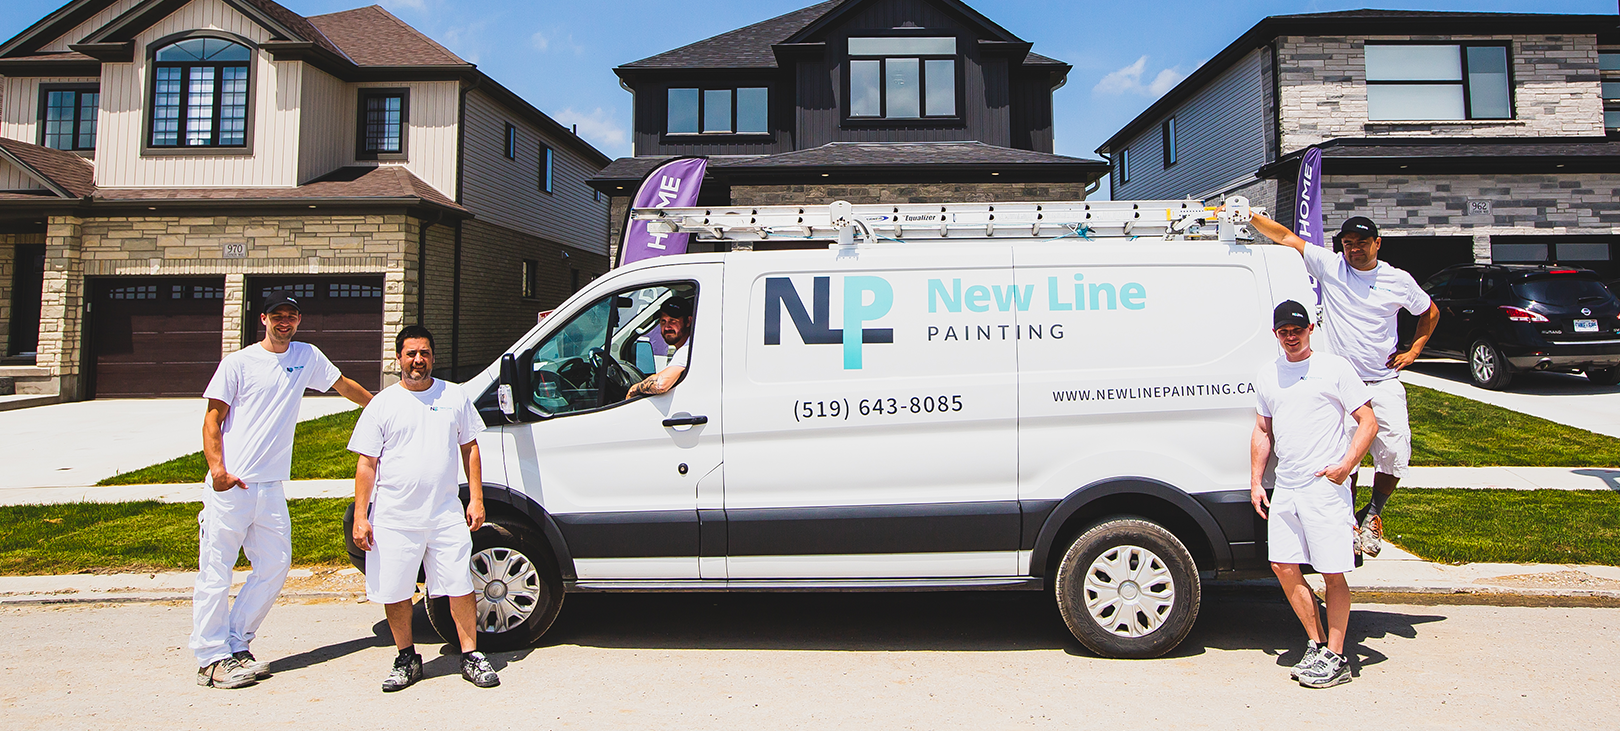 new line painting team with van